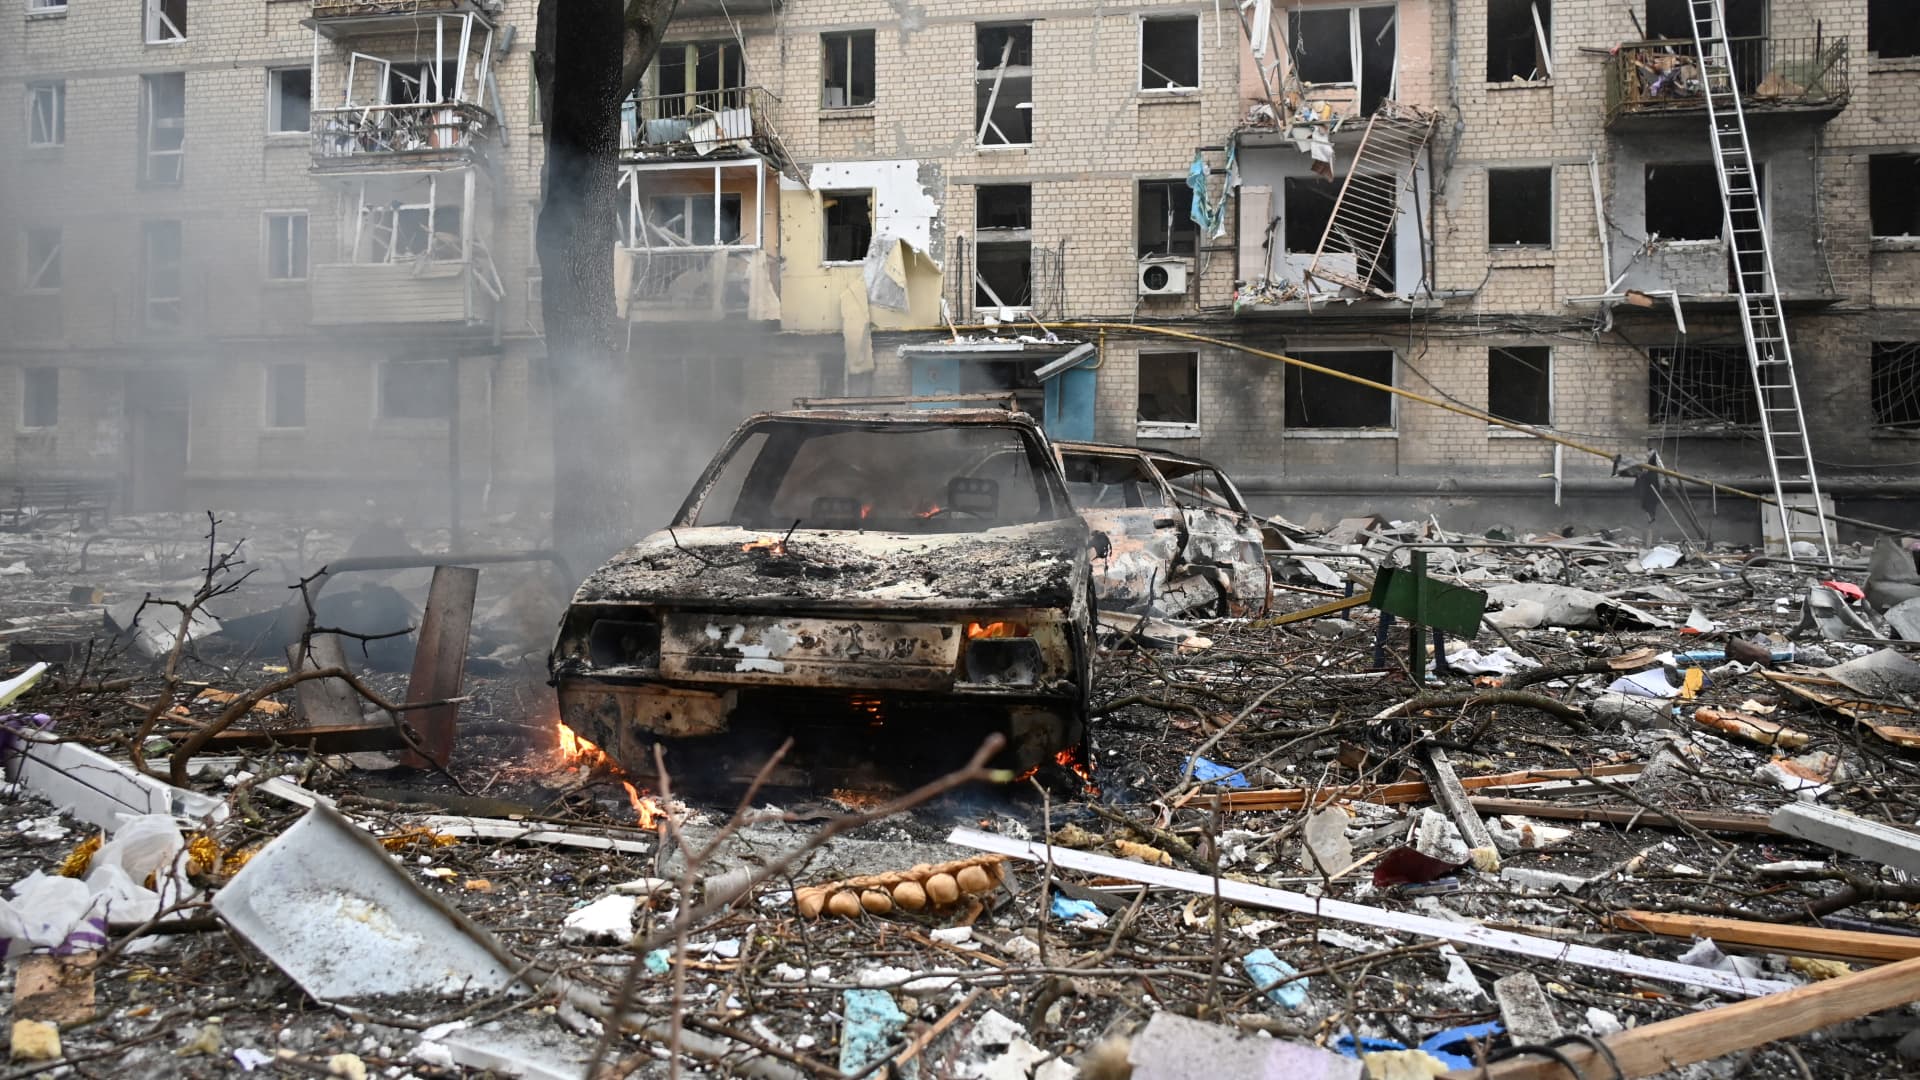 TOPSHOT - This photograph taken on January 23, 2024 shows destroyed vehicles in front of a residential building destroyed as a result of a missile attack in Kharkiv. Dozens of people were injured and two killed following an overnight aerial barrage by Russian forces targeting the Ukrainian capital Kyiv and the second-largest city Kharkiv, officials said on January 23, 2024. (Photo by SERGEY BOBOK / AFP) (Photo by SERGEY BOBOK/AFP via Getty Images)